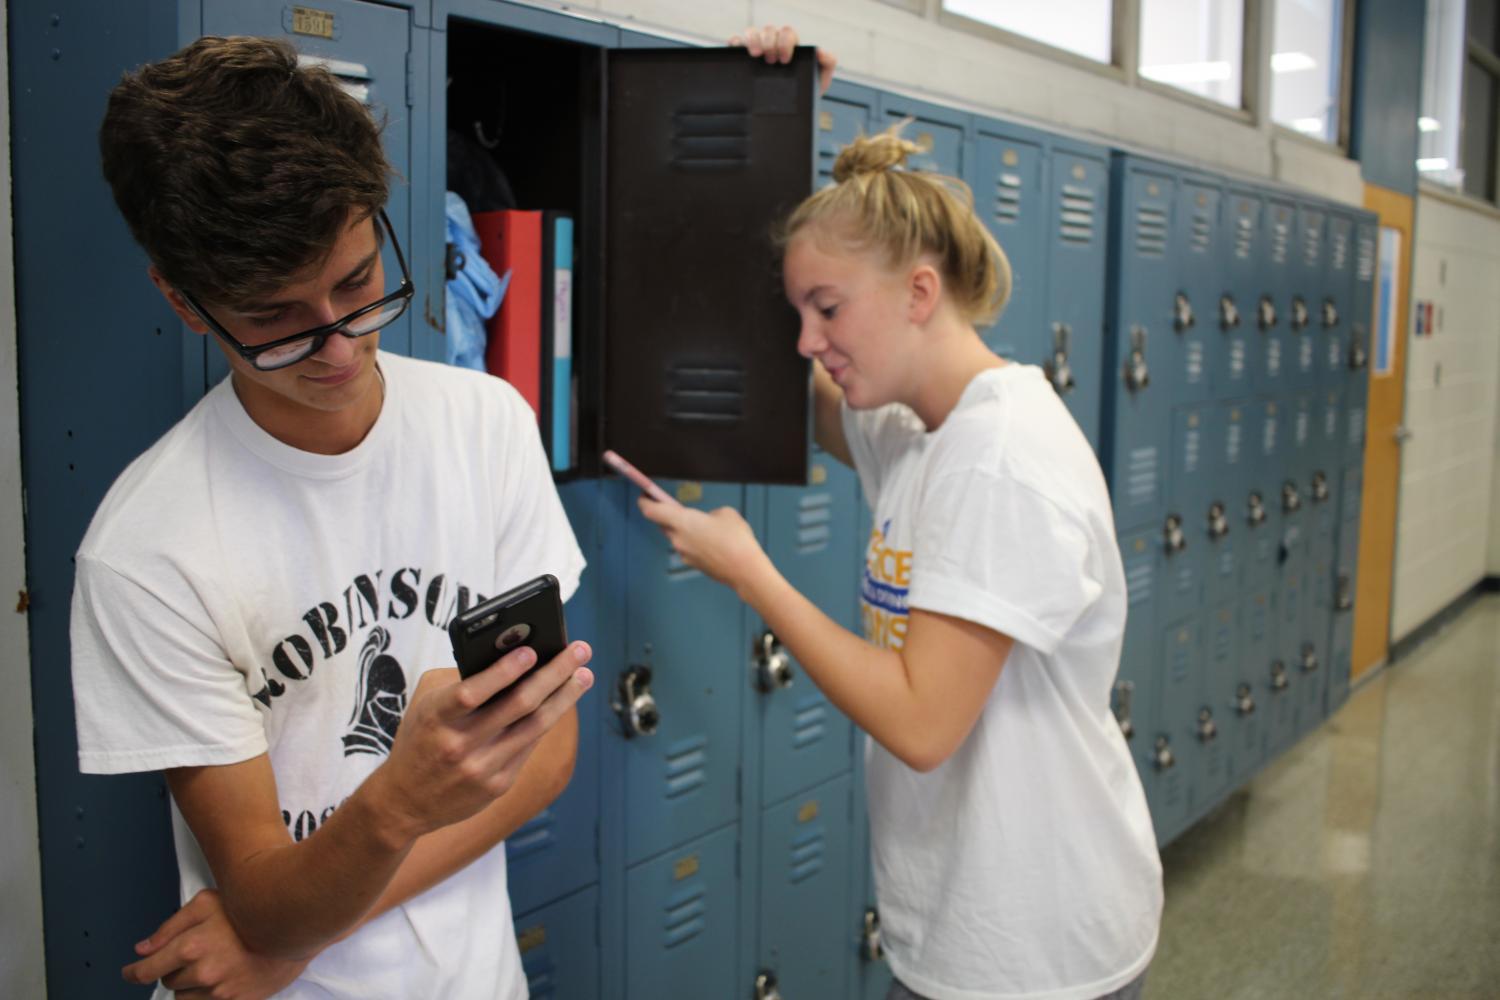 Abigail Meyer (18) and Andrew McMillan (18) wait in the halls of Robinson on their cellphones.